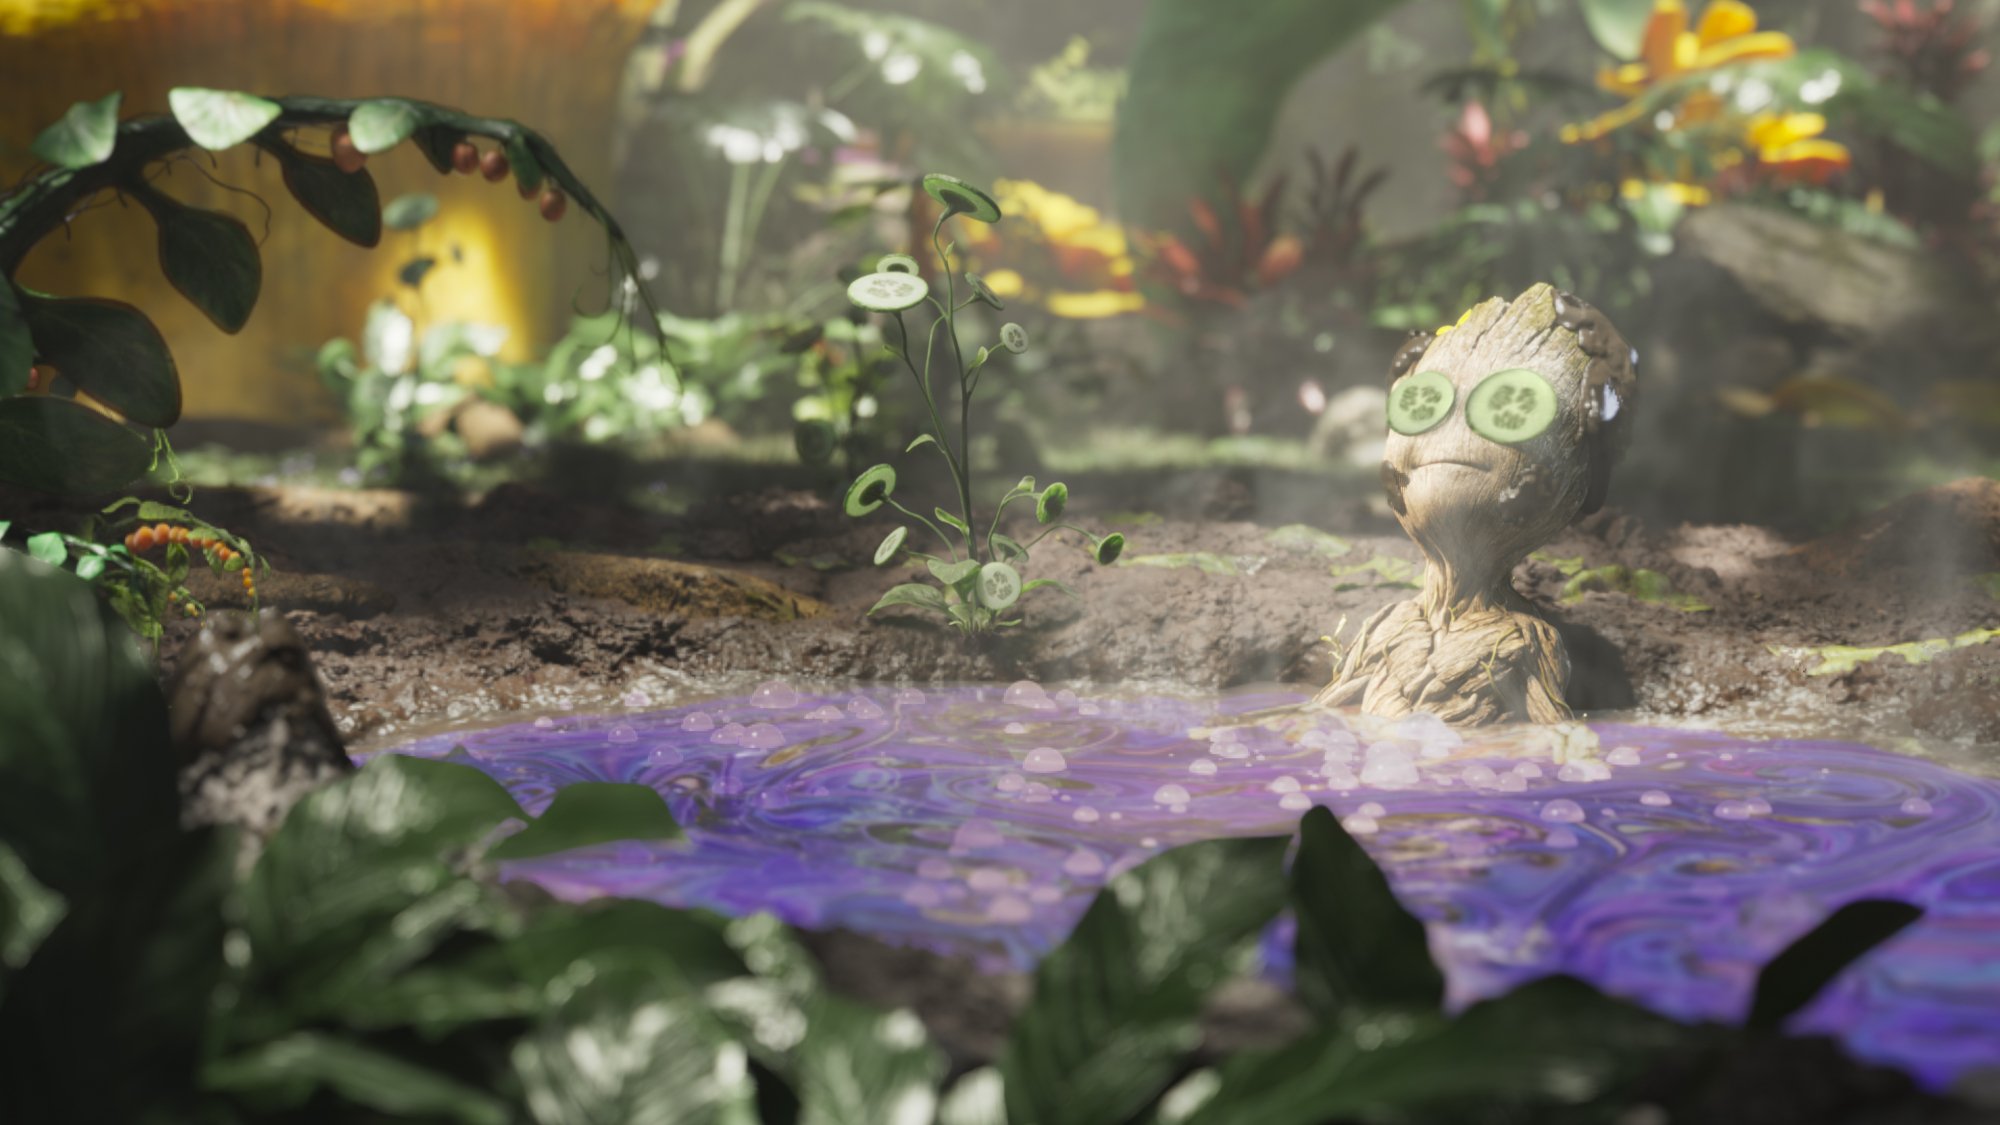 Baby Groot taking in a bath in Marvel's 'I Am Groot' short, 'Groot Takes a Bath.' He's surrounded by greenery and has cucumbers over his eyes.